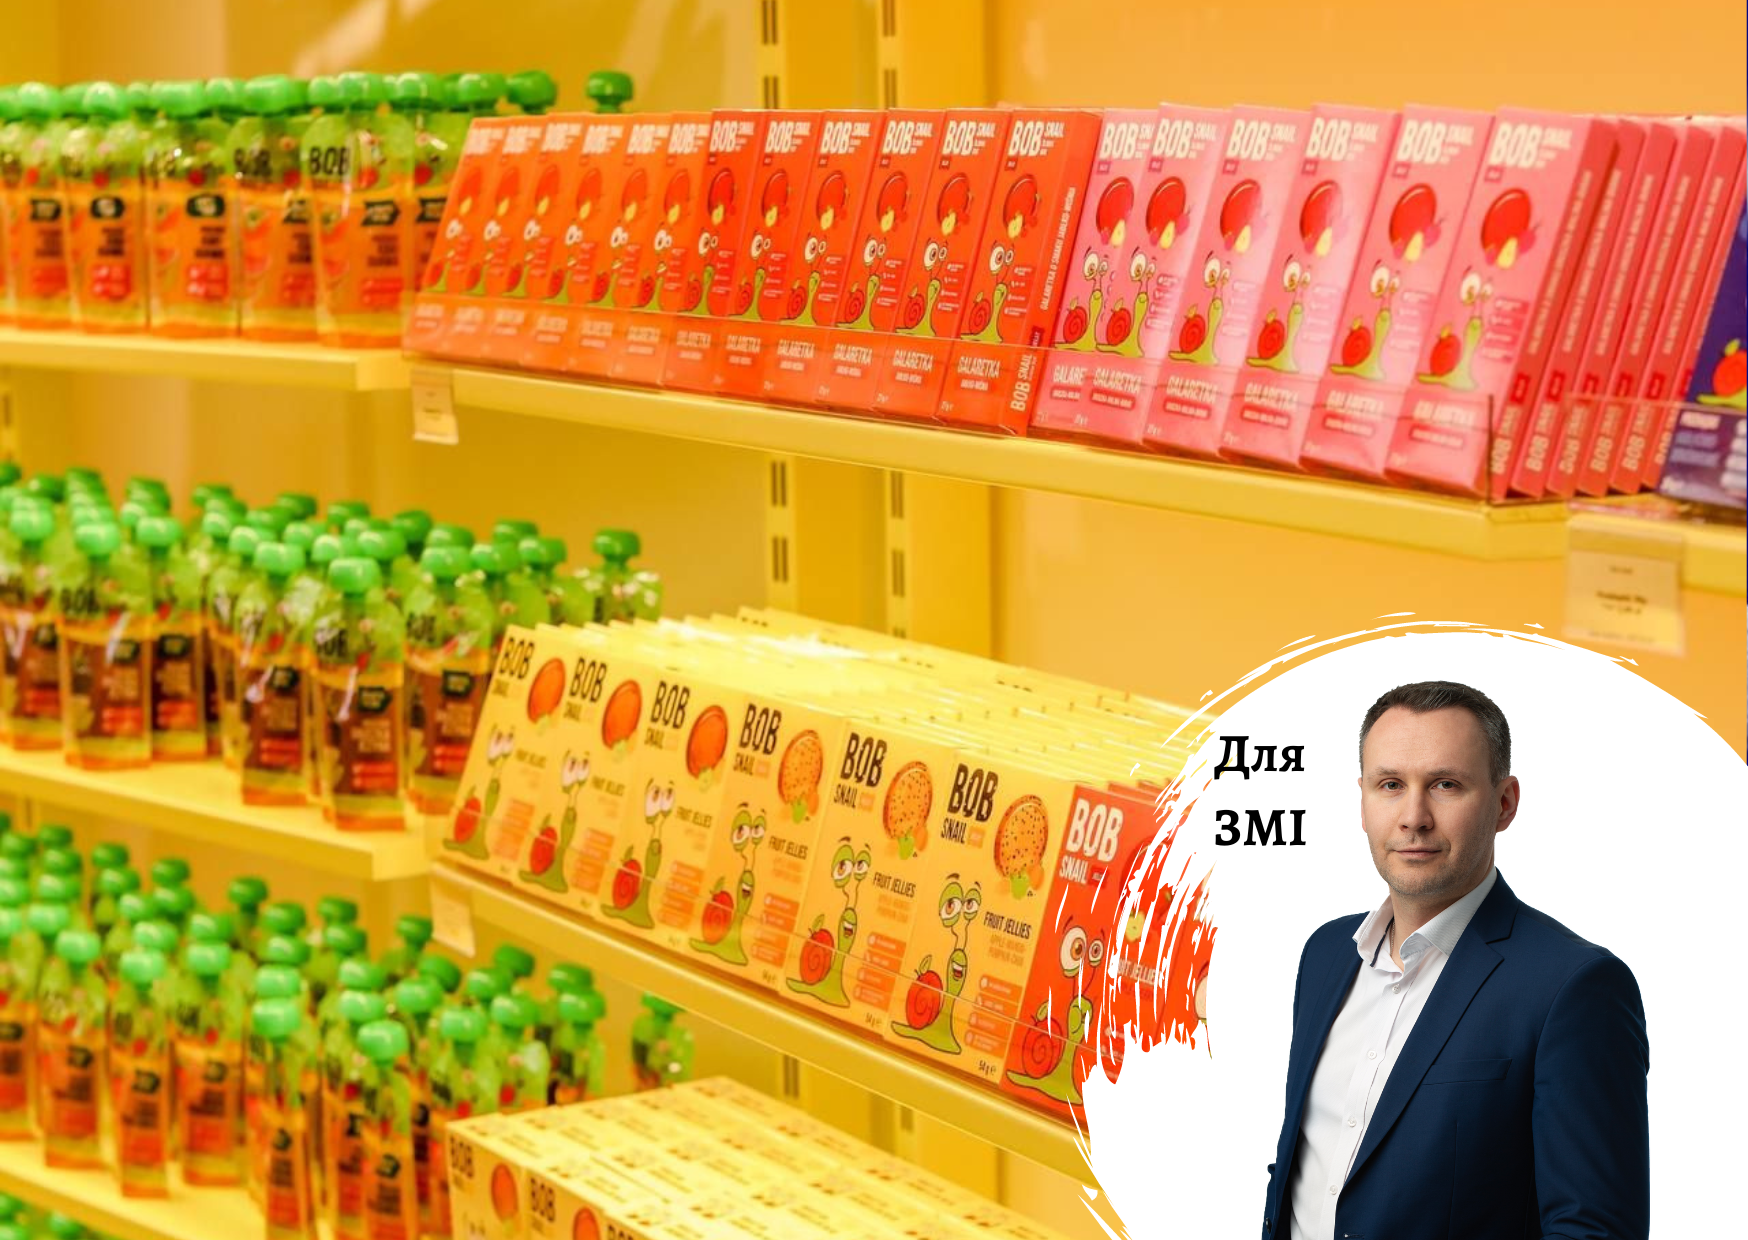 The history of the Bob Snail sweets manufacturer - comments on the market by Pro-Consulting CEO Oleksander Sokolov. FORBES